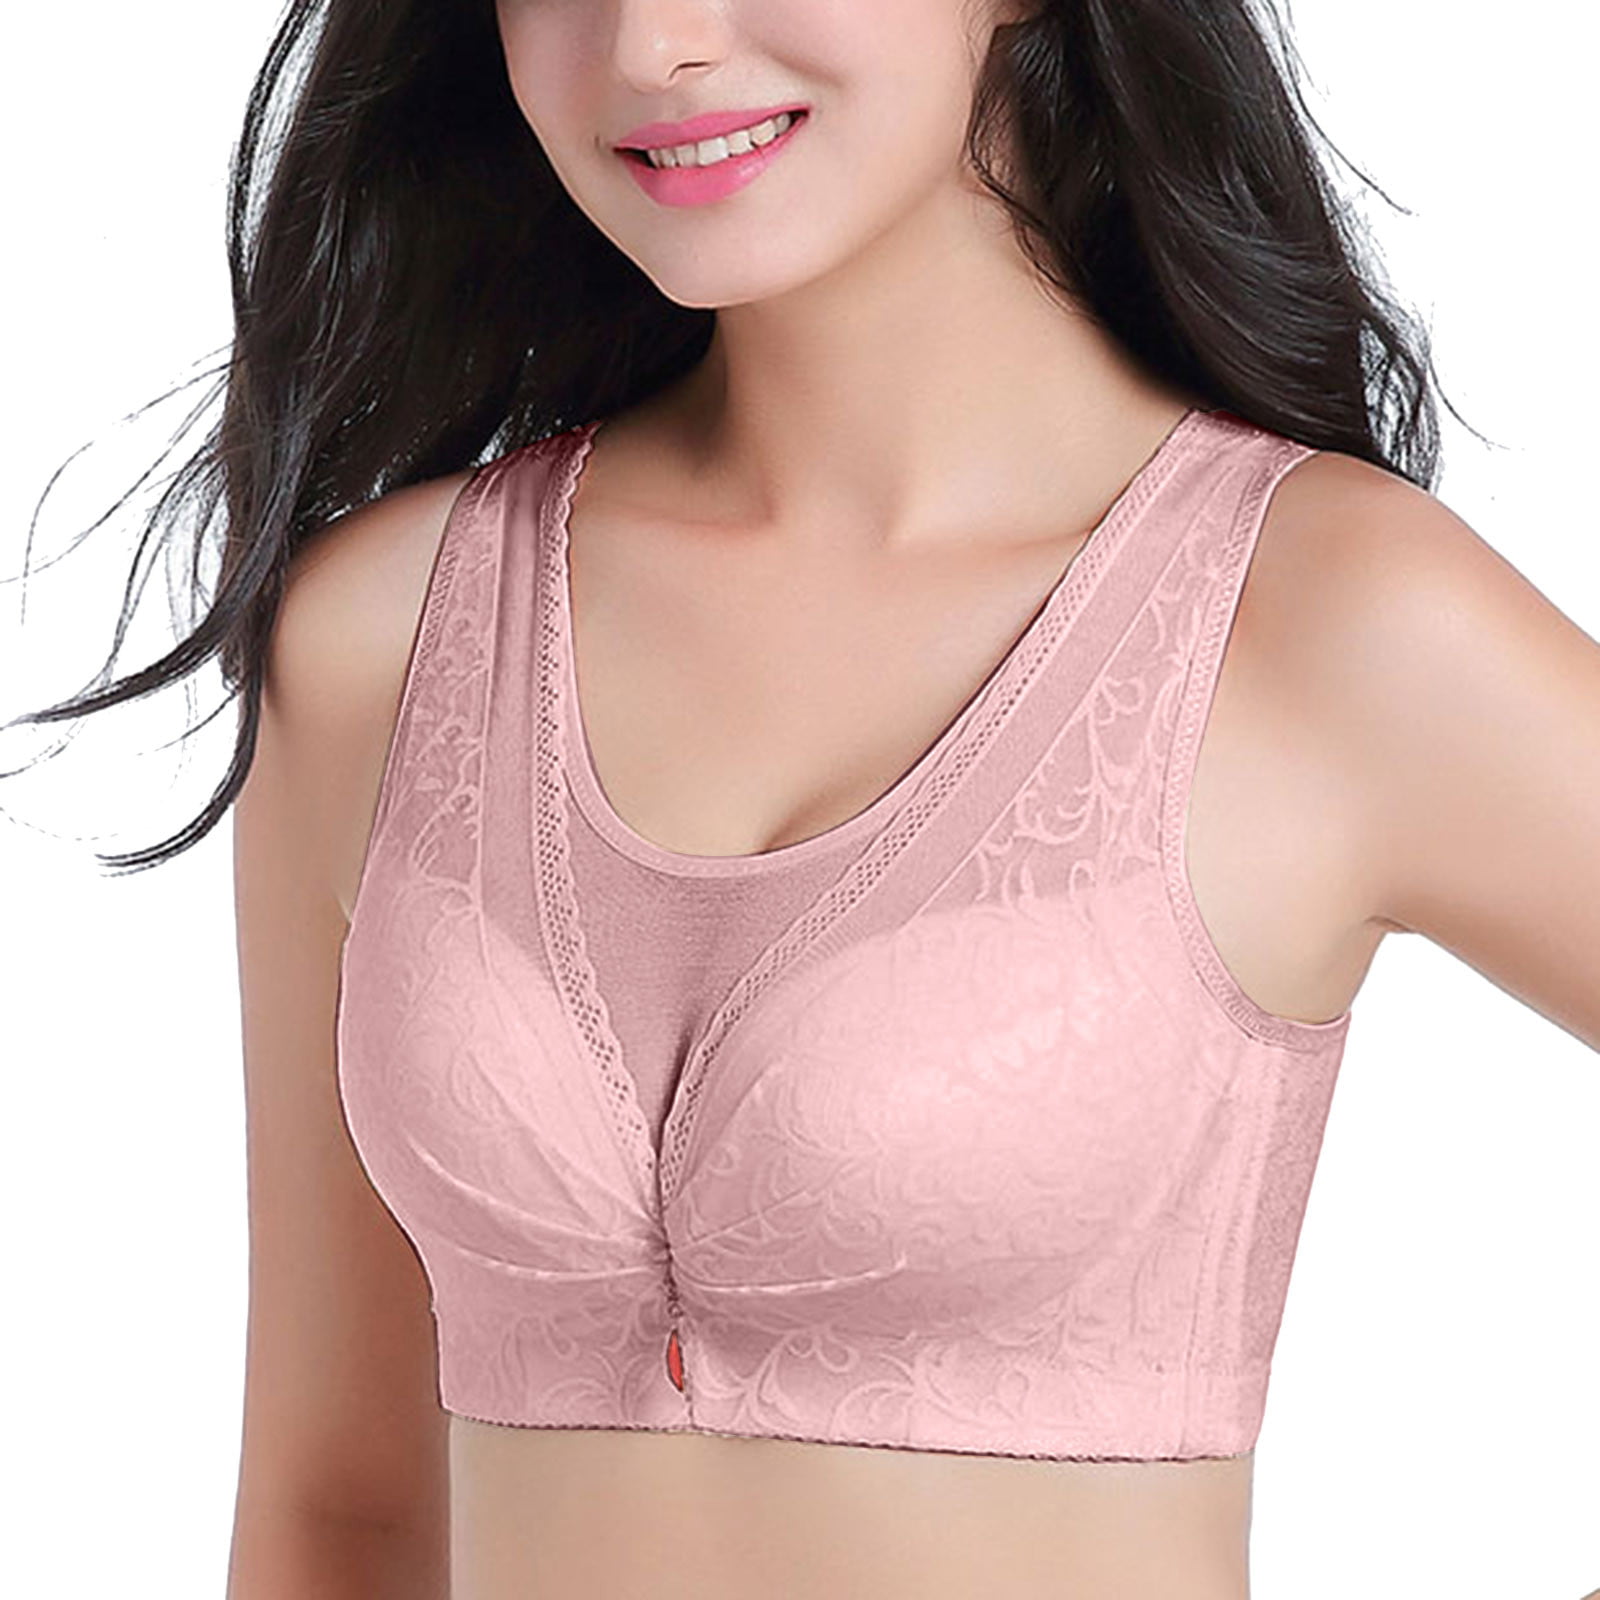 Buy Full Cup Thin Underwear Bra Plus Size Underwire Adjustable lace Bras  Women's Bra Breast Cover B C D Cup Large Size Bh C3306 Lavender Cup Size D  Bands Size Size 44